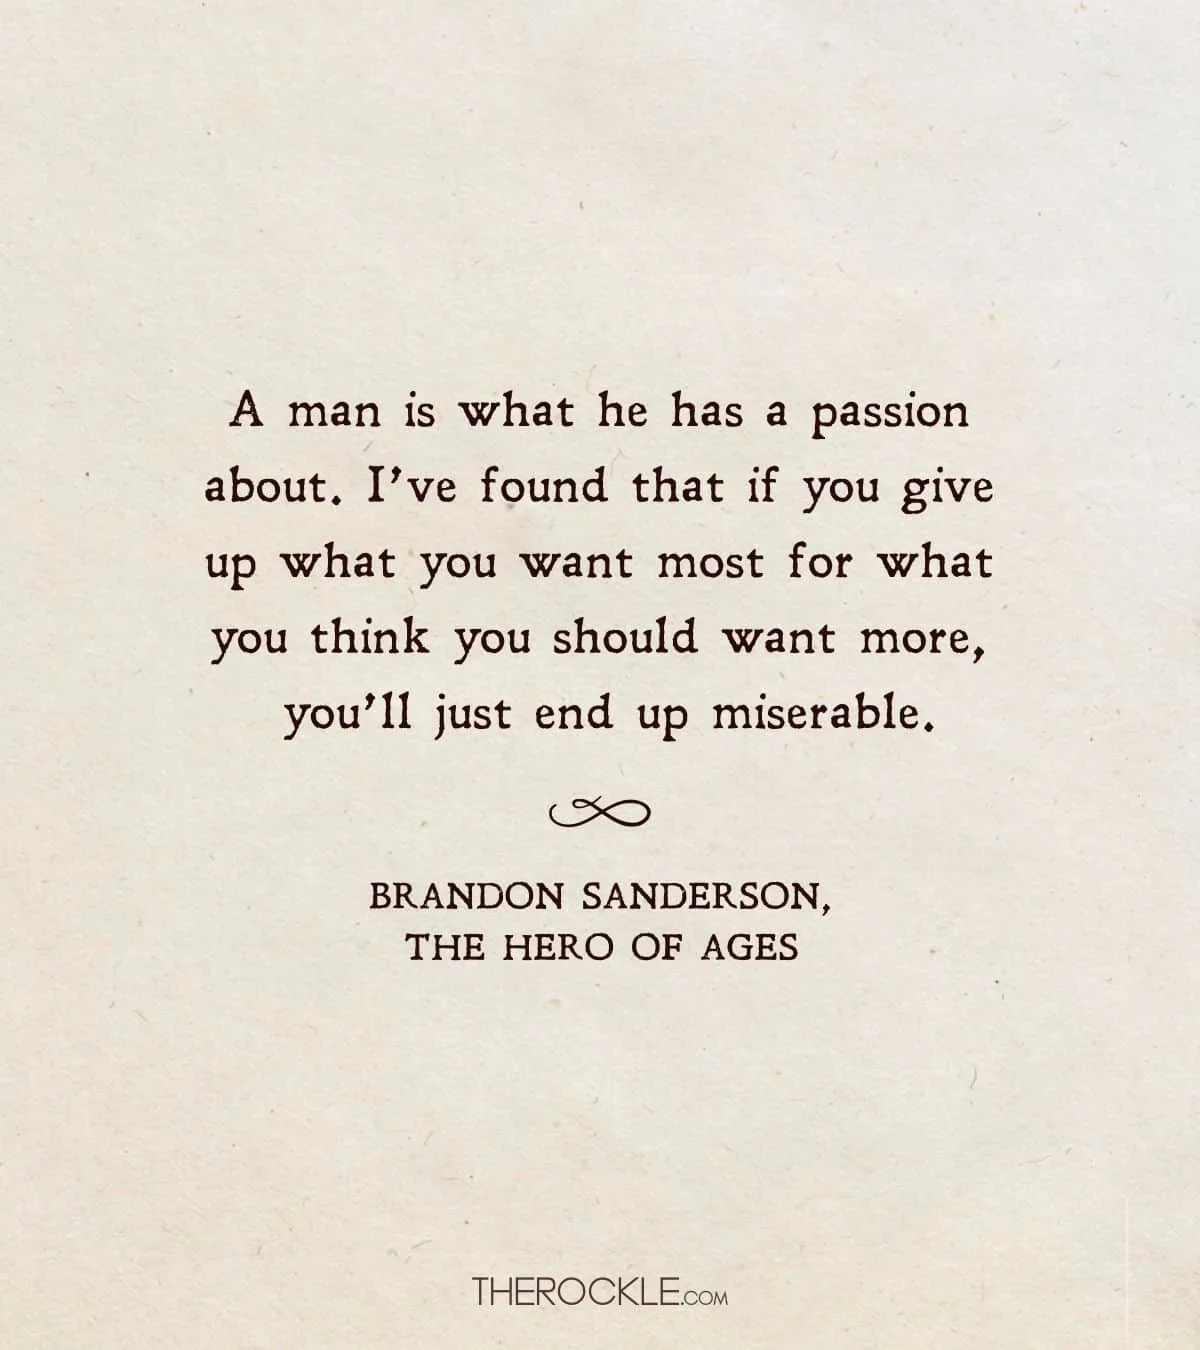 Brandon Sanderson's quote about passion and happiness in life